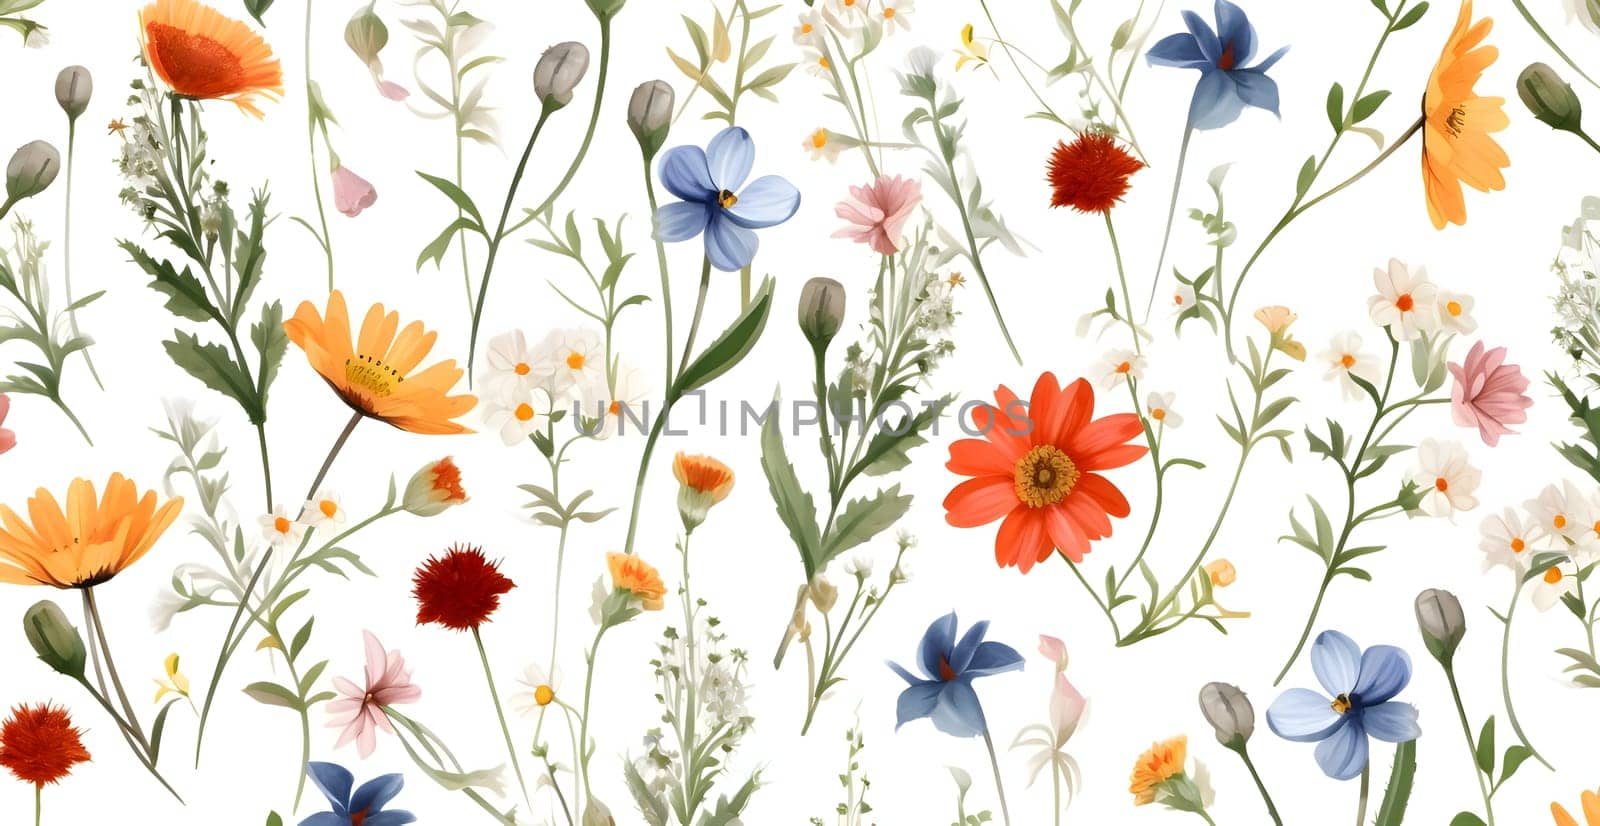 Patterns and banners backgrounds: Seamless pattern with watercolor wildflowers. Vector illustration.